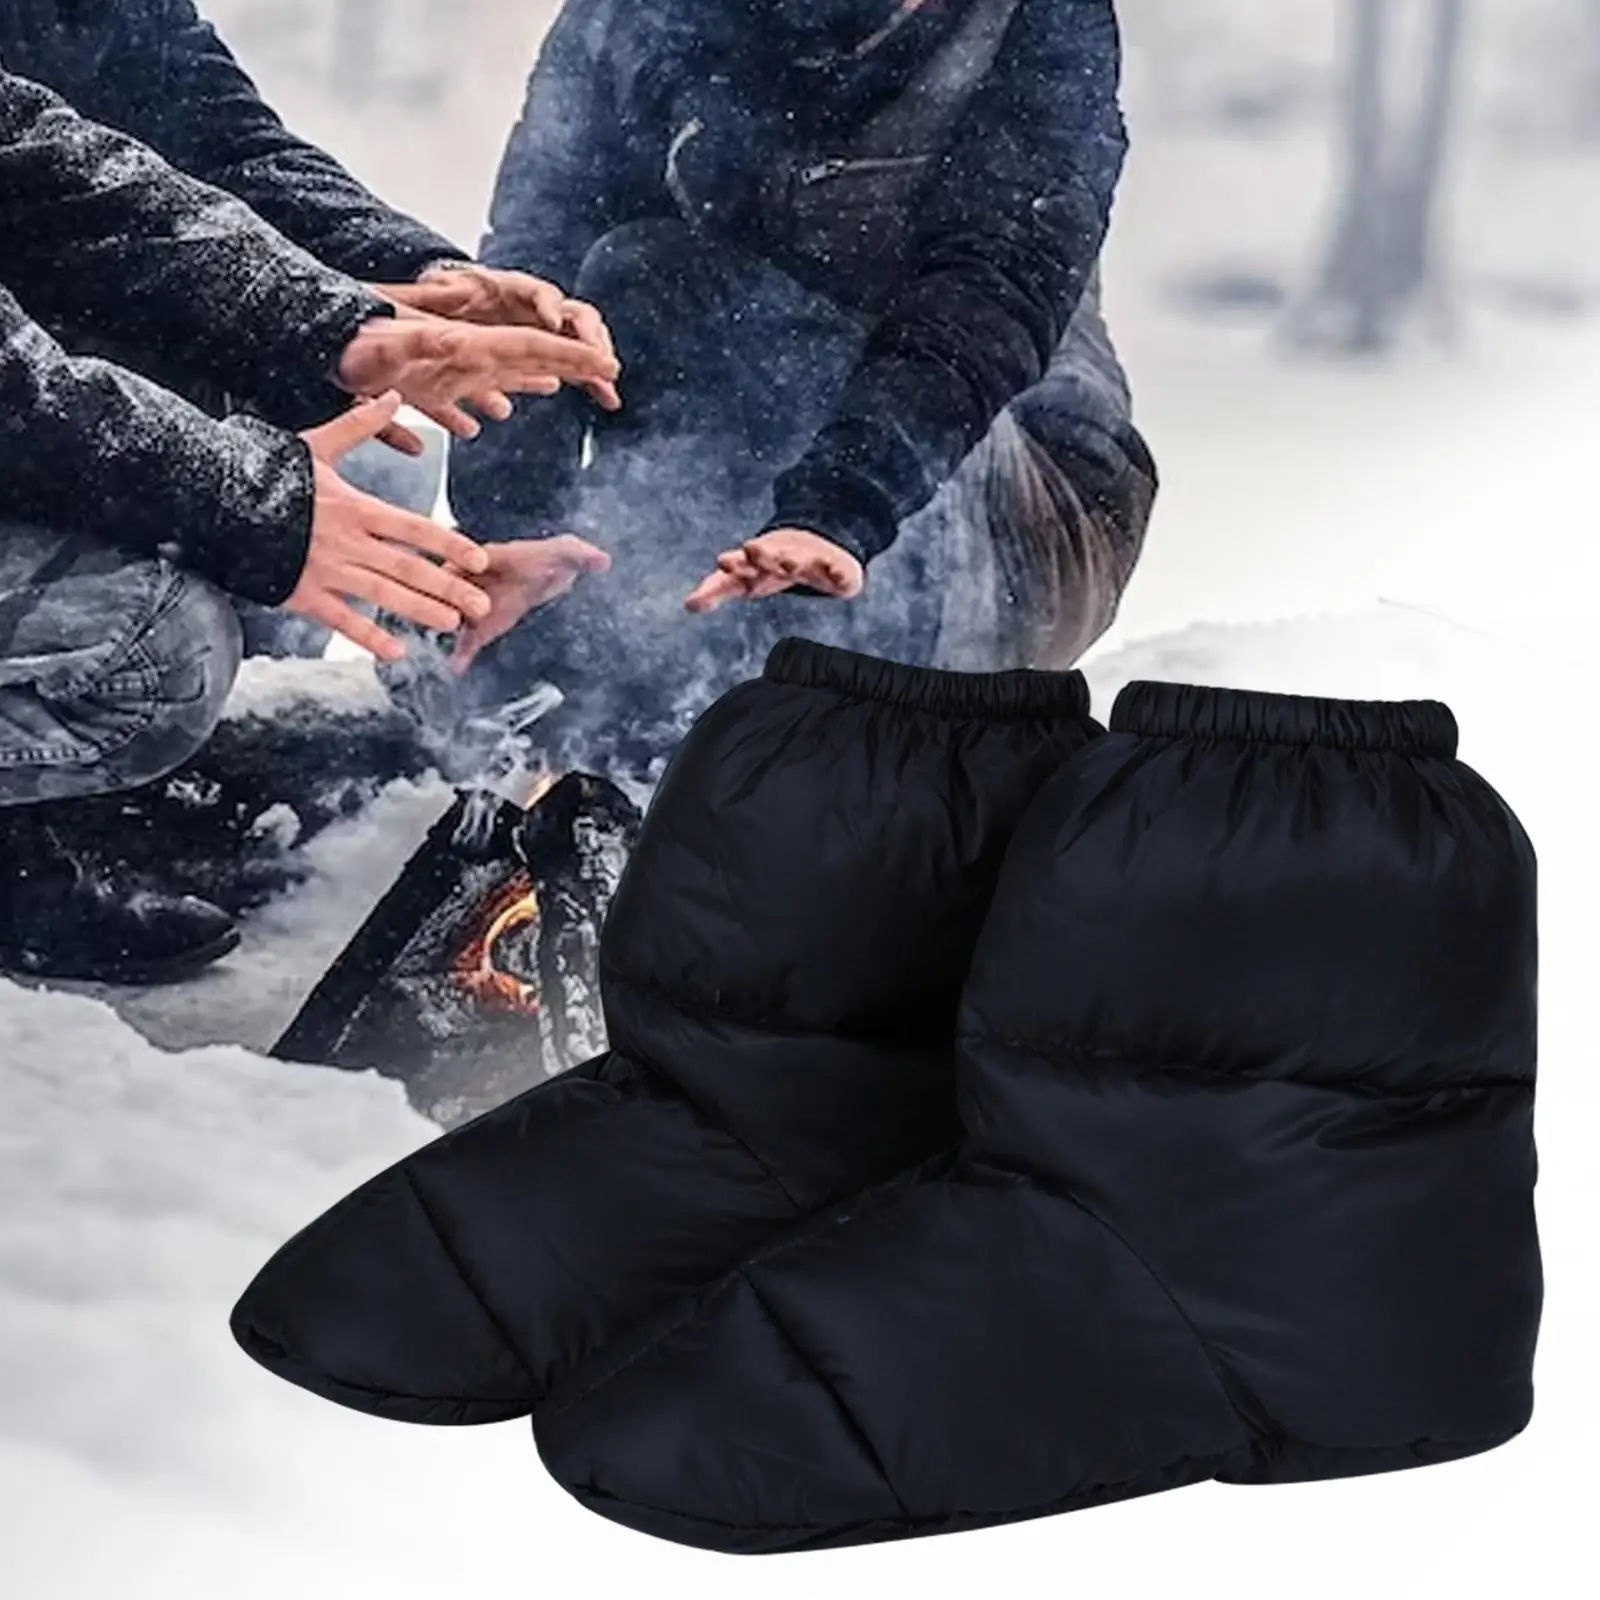 Winter Down Slippers Bootie Shoes Waterproof Adults Keep Warm Soft Lightweight Footwear for Office Bedroom Hiking Skiing Camping